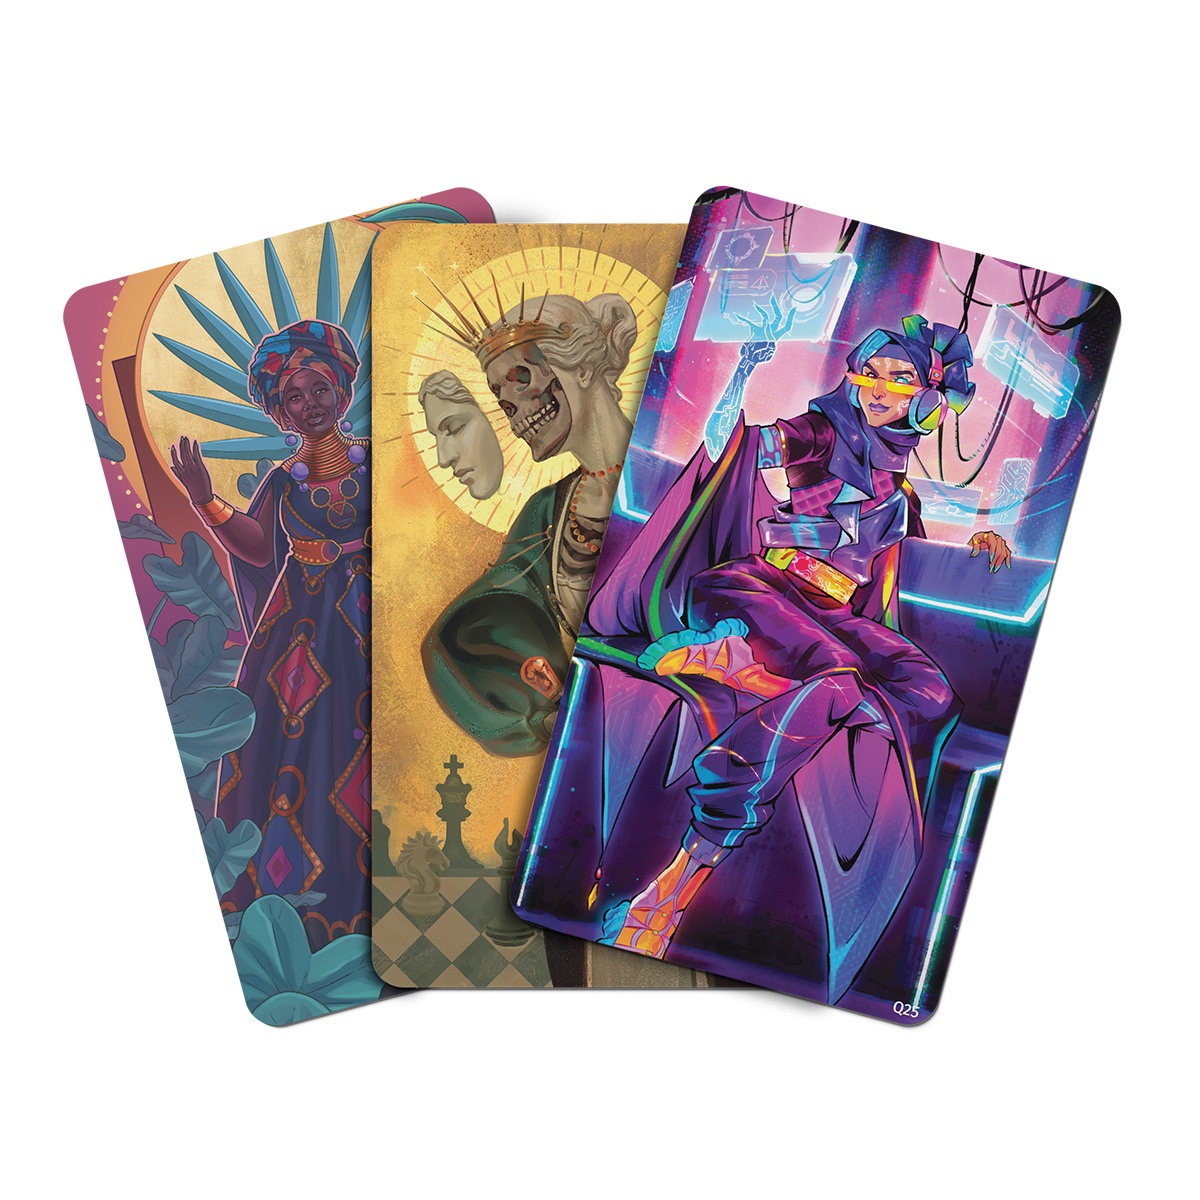 A fanned display of three second-edition queen illustration cards from Alex Roberts’ indie card-based RPG For the Queen. The cards depict (from right to left) a cyberpunk queen surrounded by floating, translucent screens; a religious-figure queen with a skull face, crown, and halo; and a queen on a throne with a stylized blue sunburst behind her